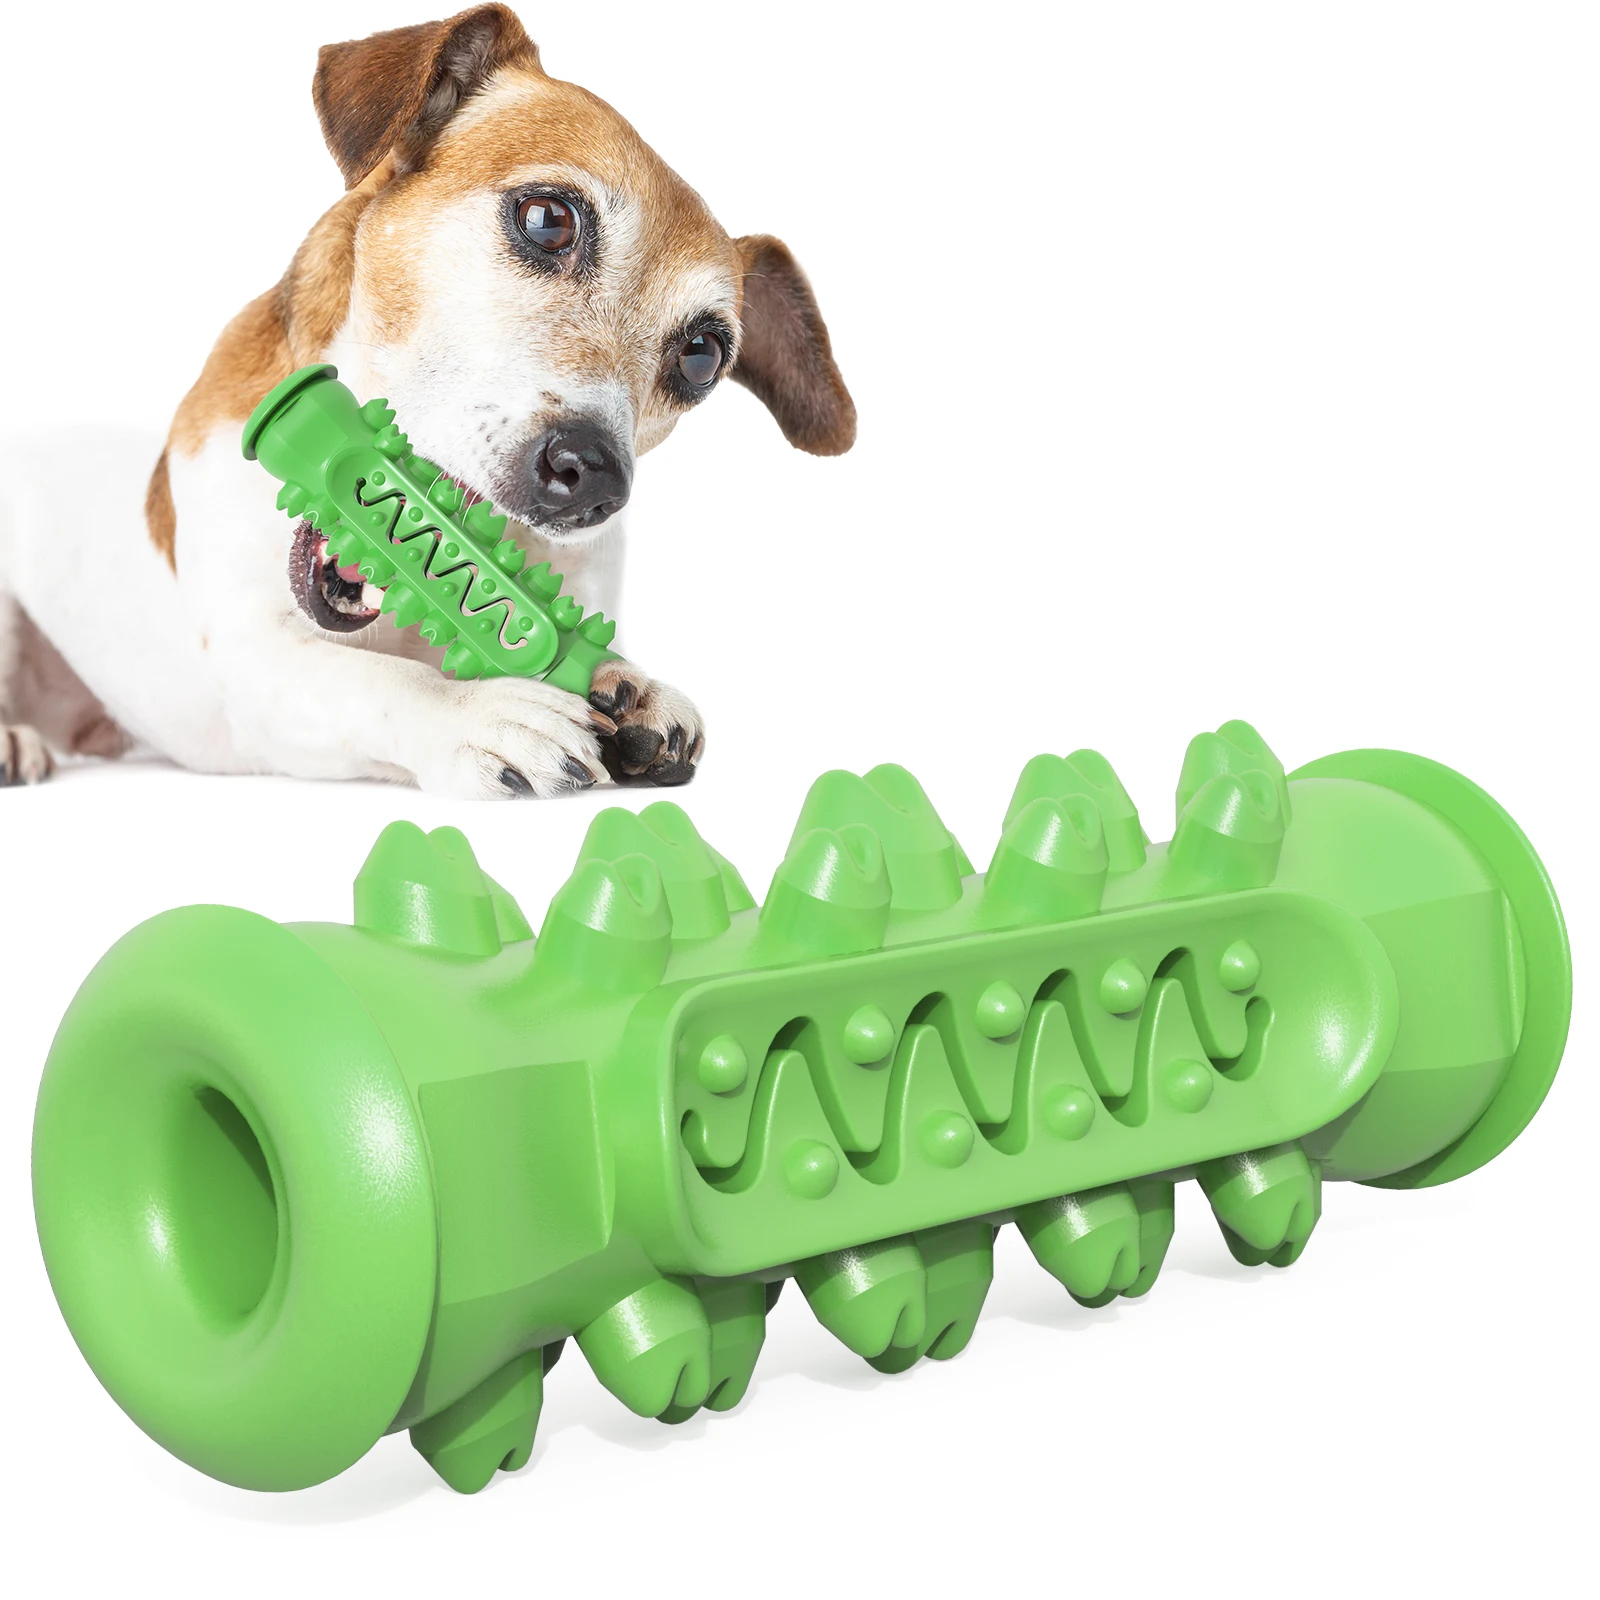 

Molar stick bone green pet dog chews toys durable chewing toys rubber toothbrush dog chew toy